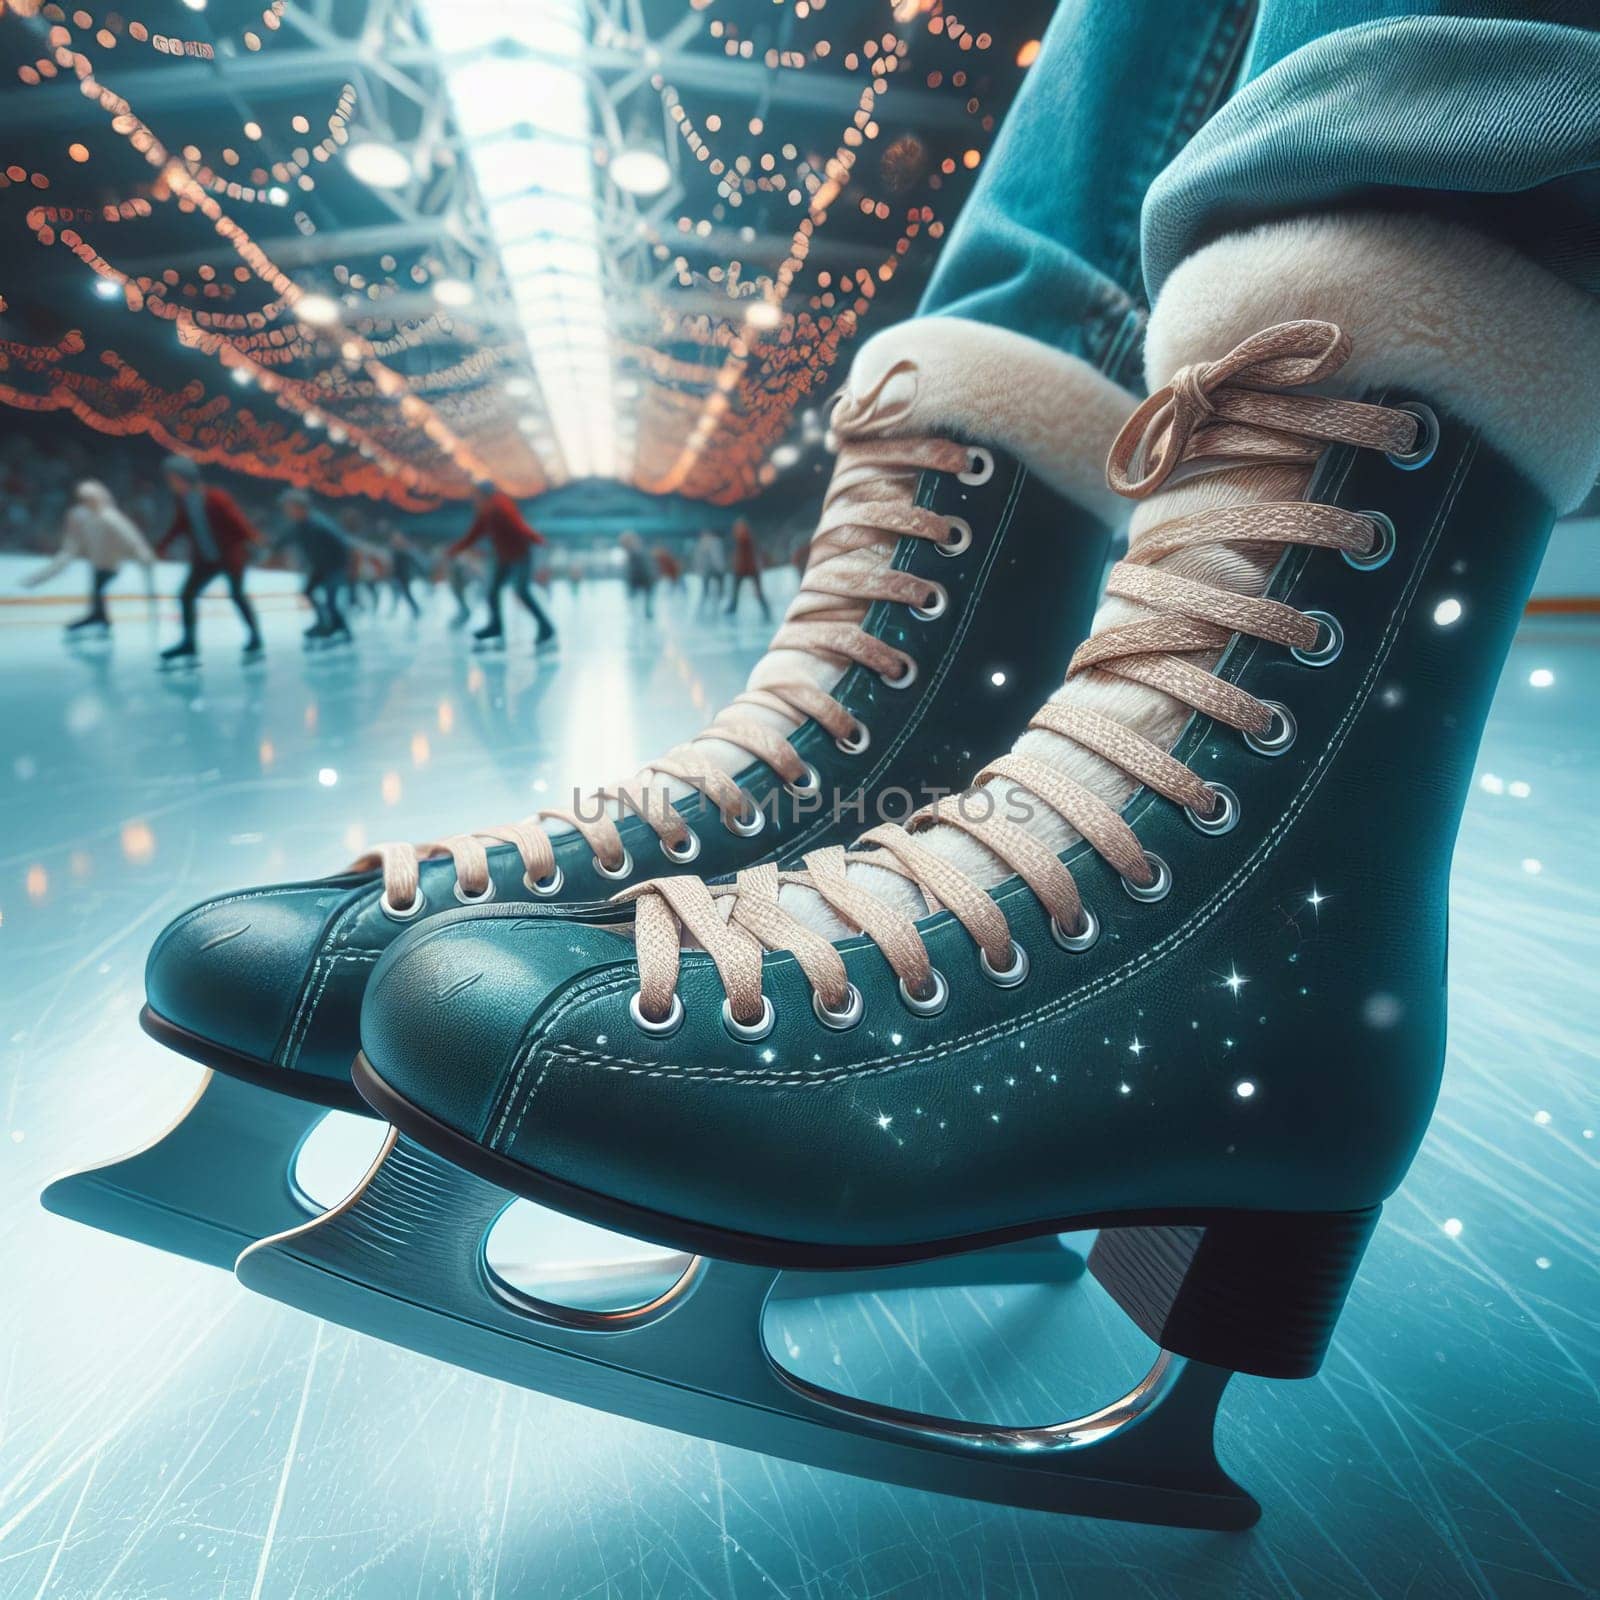 Close-up of a pair of ice skates, with the blurred background revealing an ice rink and people enjoying their skate. by sfinks